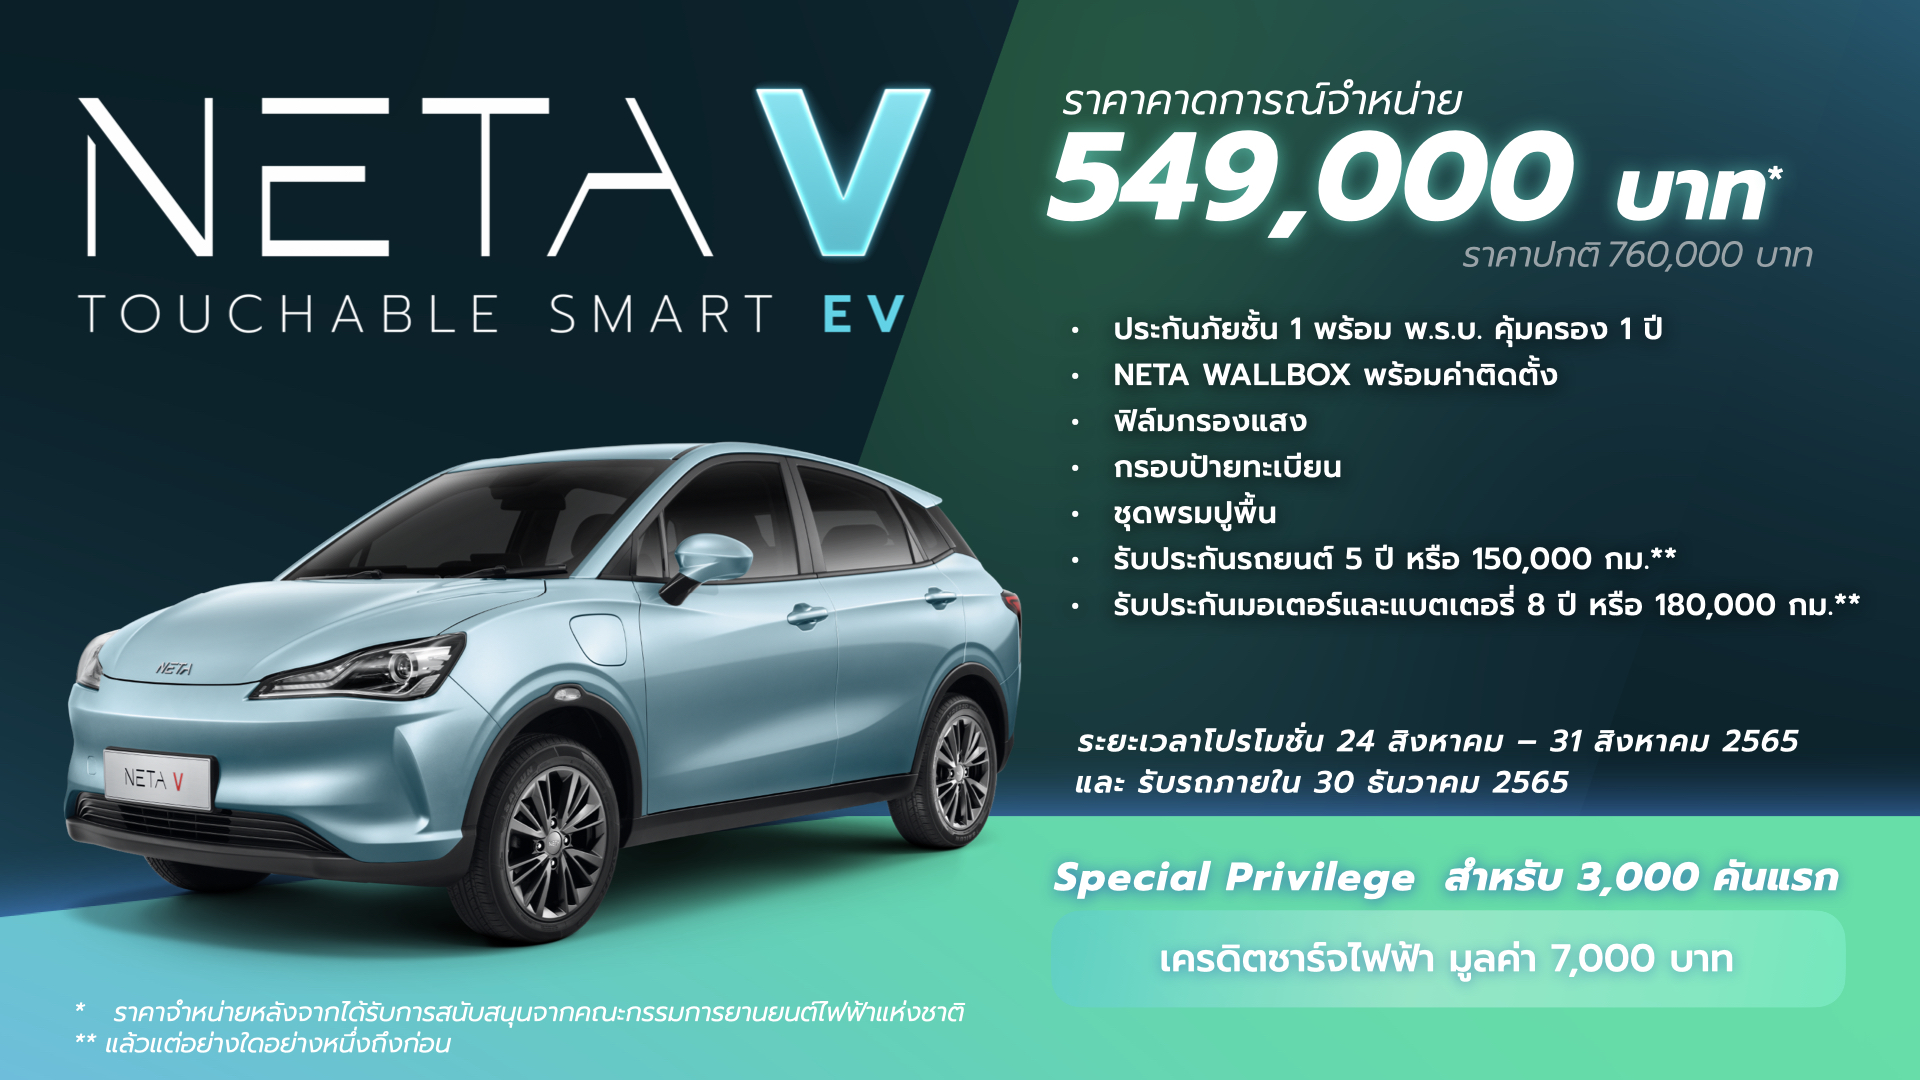 NETA V, a 100 electric car, city car style, opens the official price